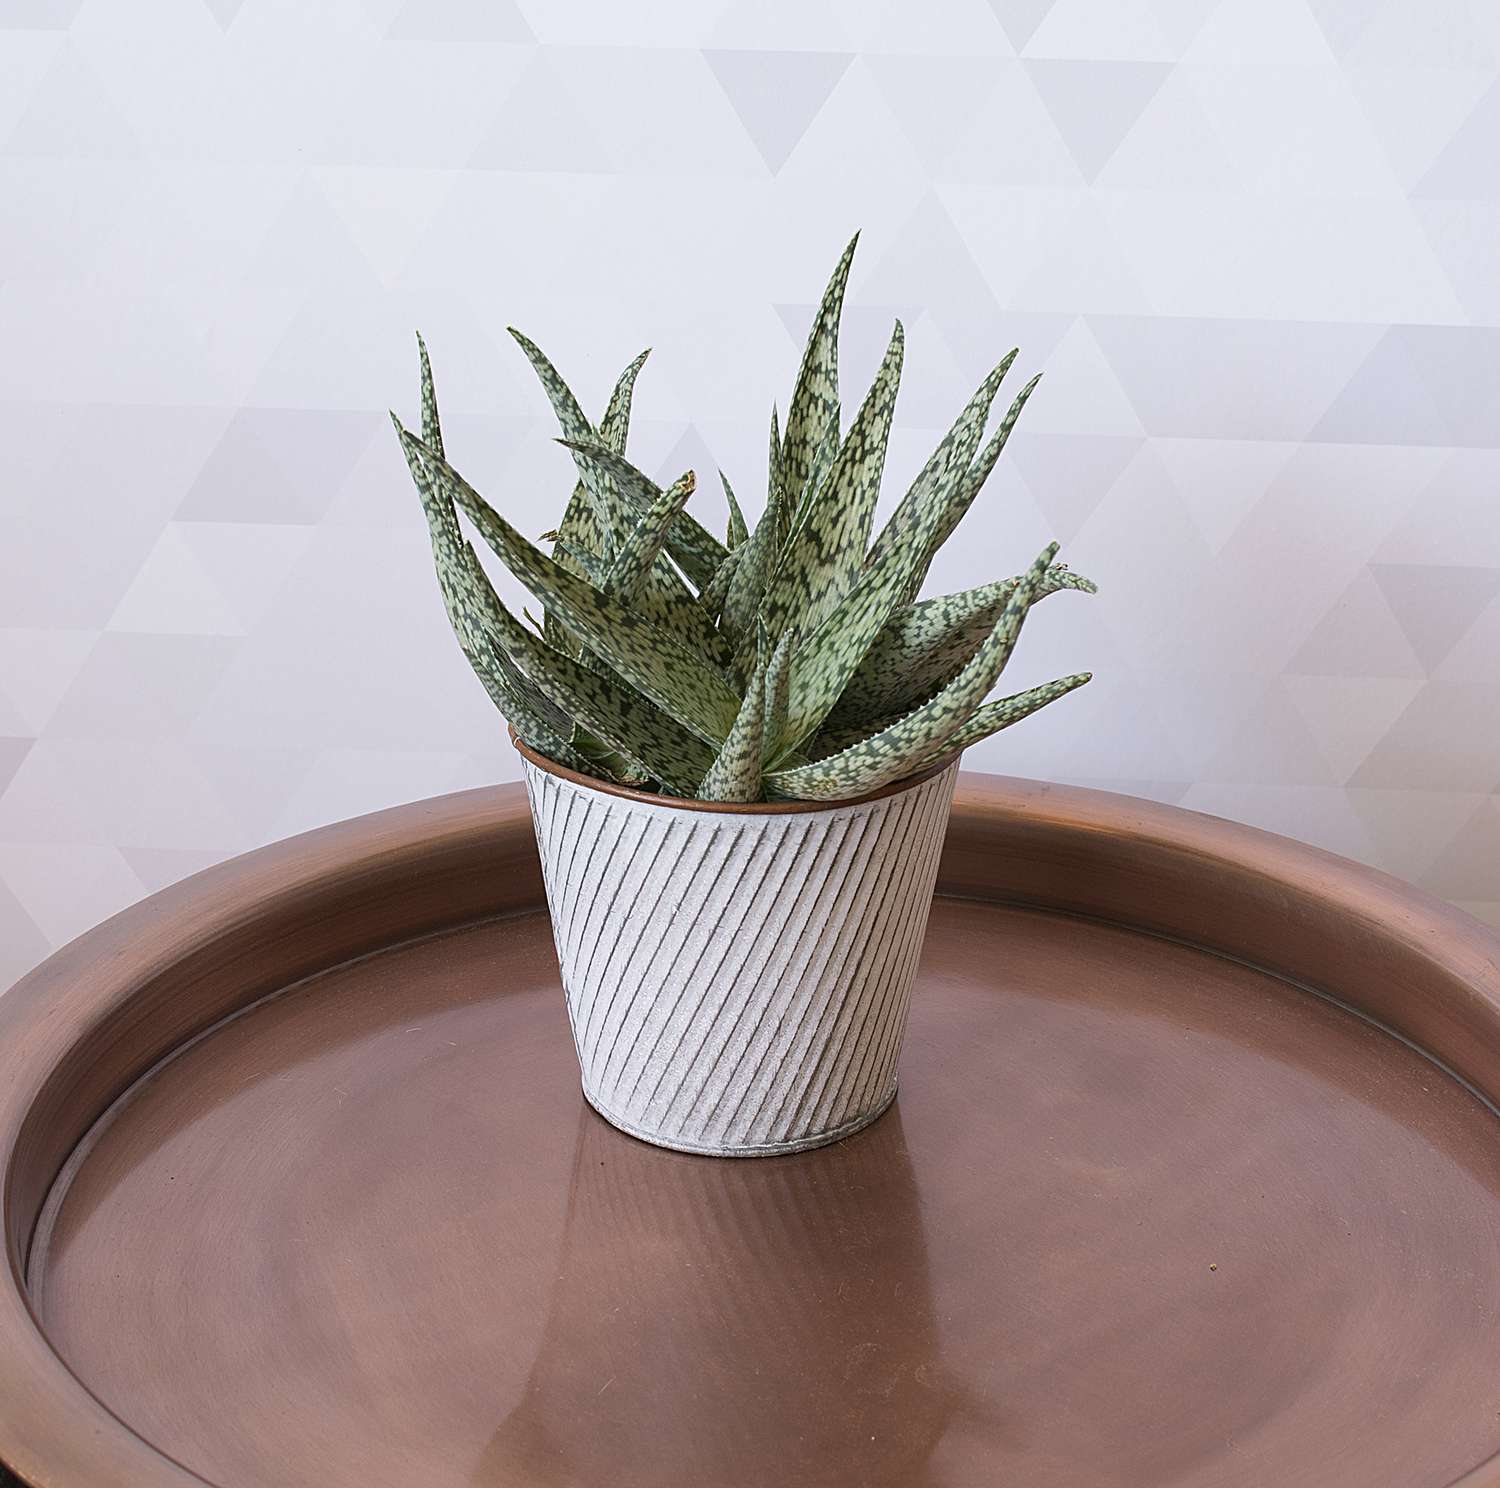 In a Dry Room: Aloe